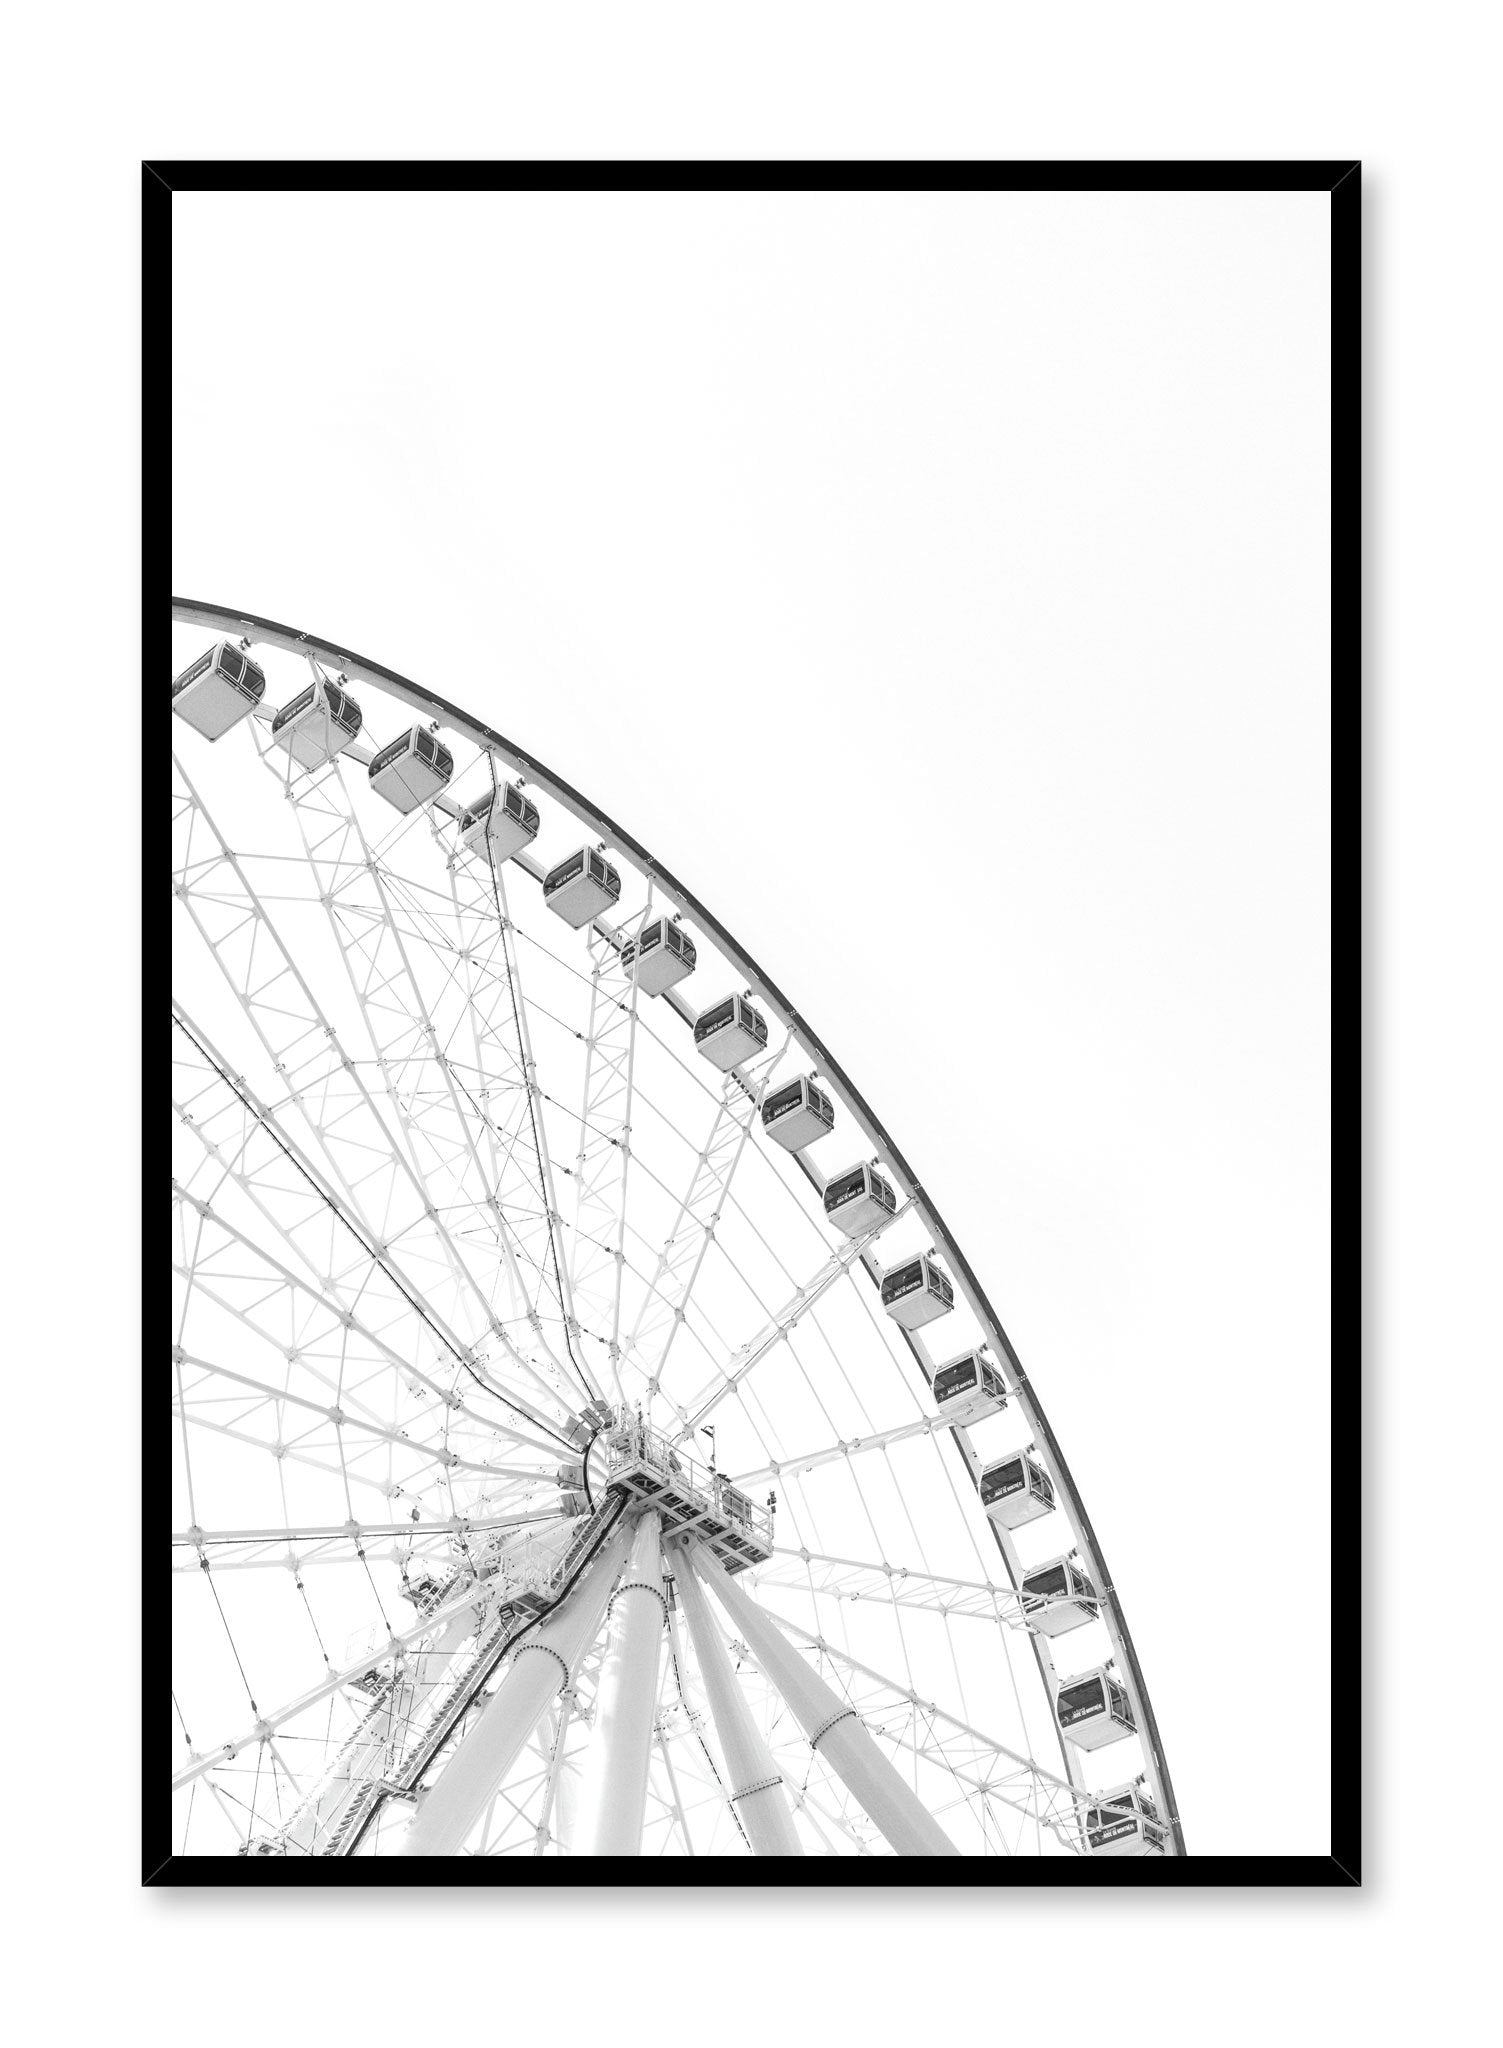 Minimalist design poster by Opposite Wall with urban photography of Montreal Grande Roue Ferris Wheel